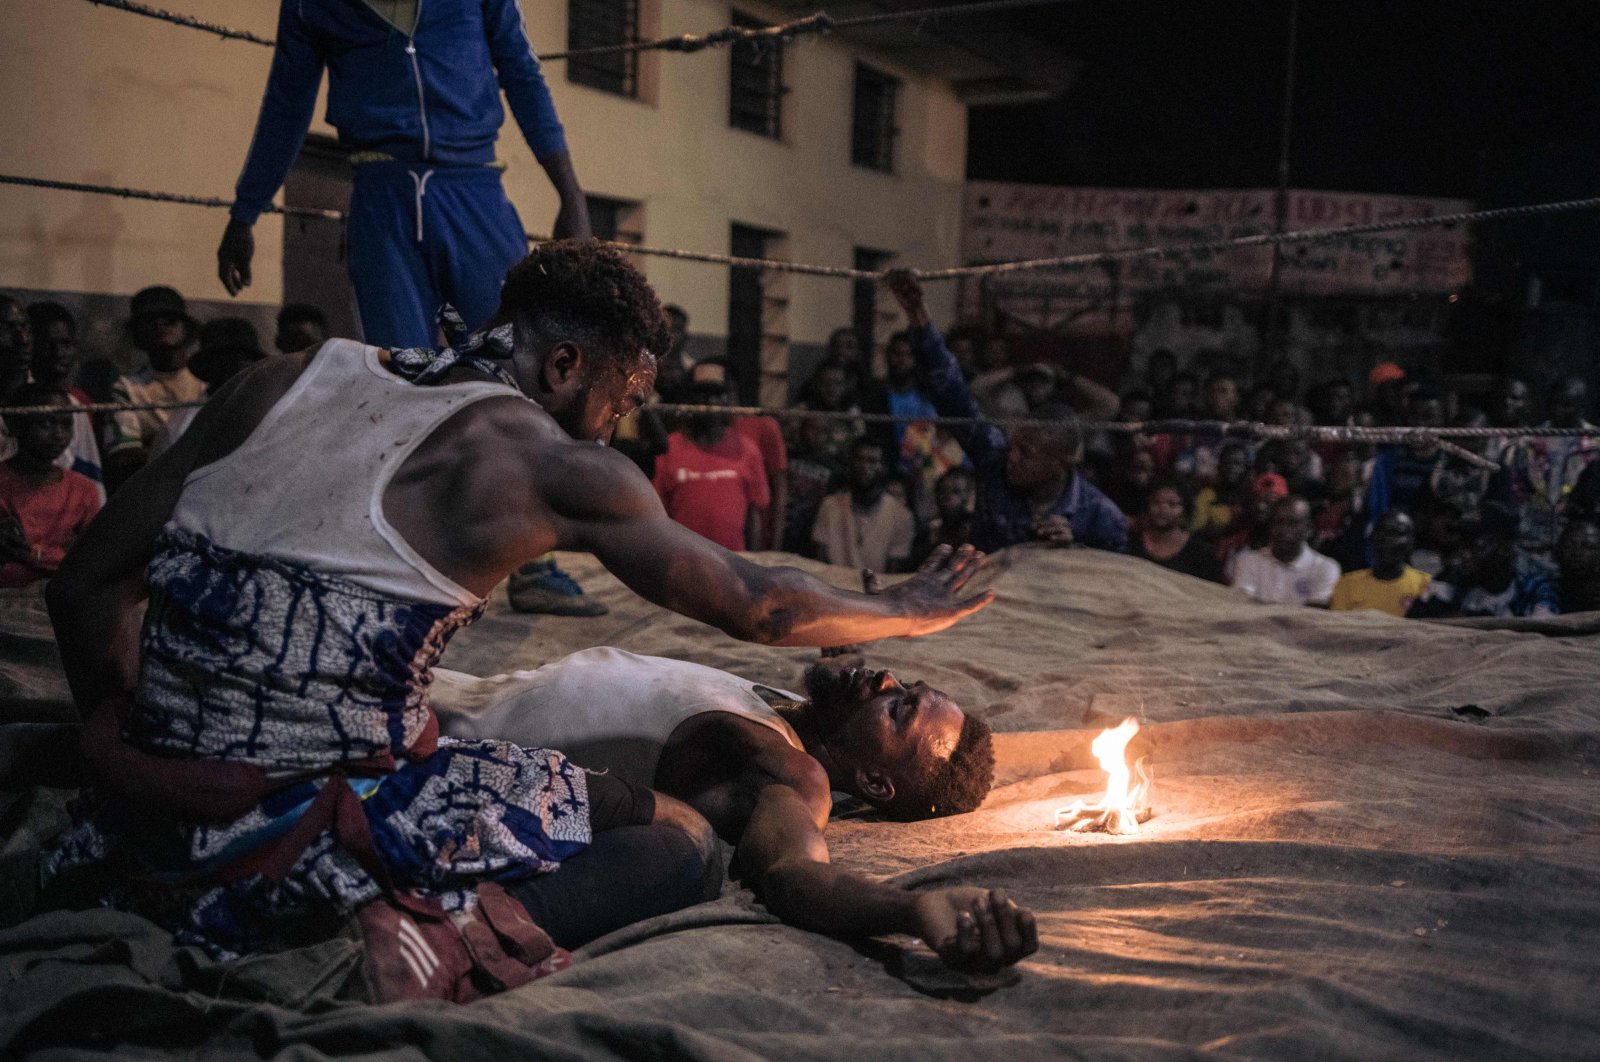 A voodoo wrestler whispers incantations over his opponent during a fight in a schoolyard in Selemenbao district, Kinshasa, Democratic Republic of Congo, July 29, 2023. (AFP Photo)